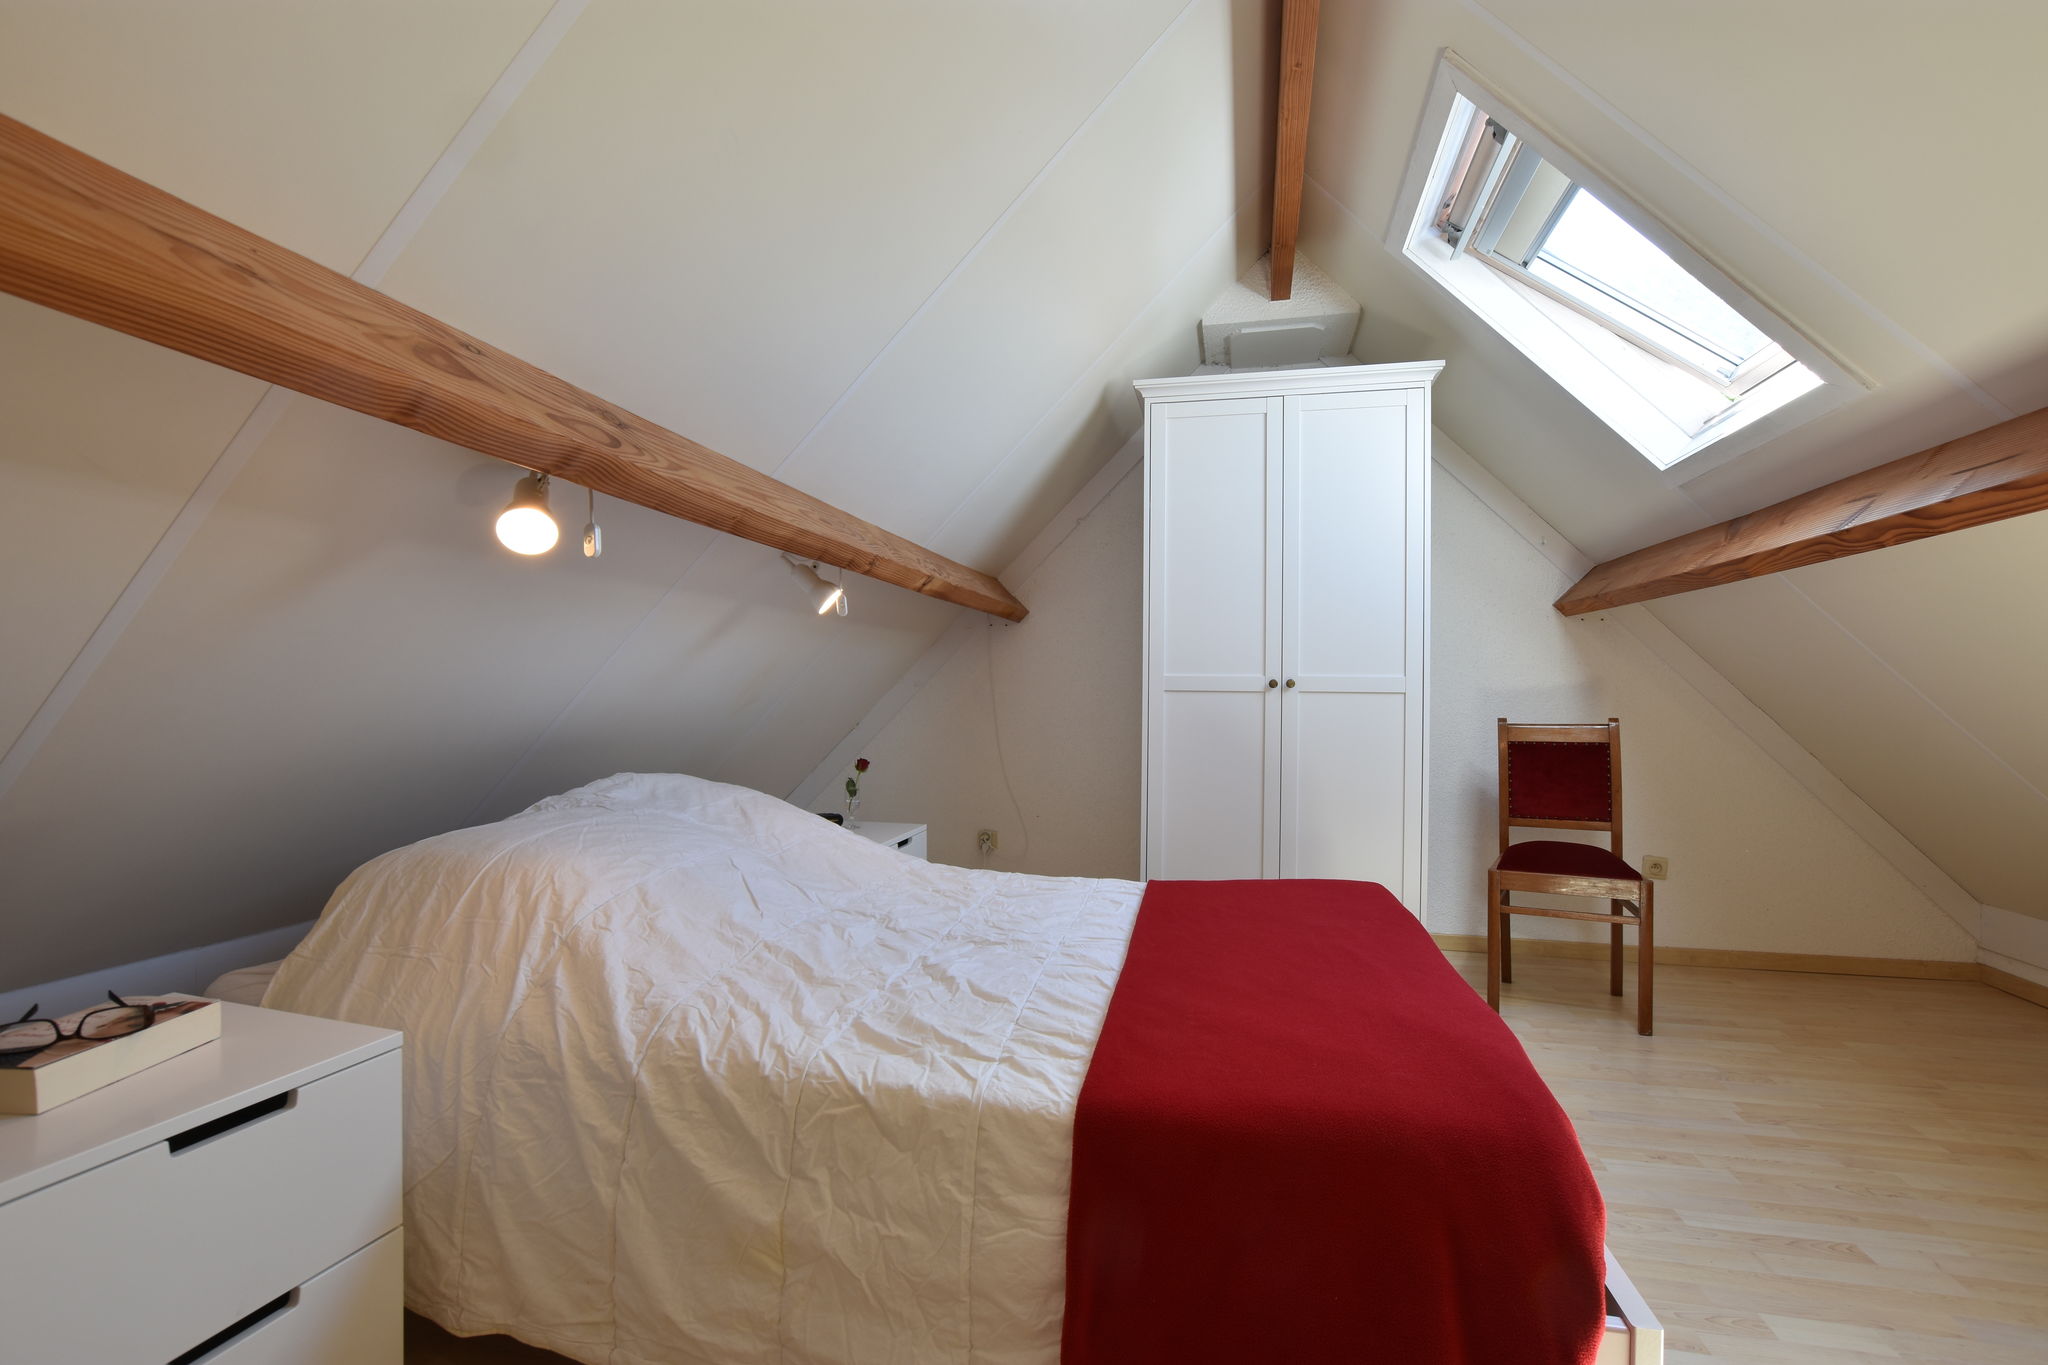 Cosy fisherman's house, ideally located for coastal walking and cycling tours